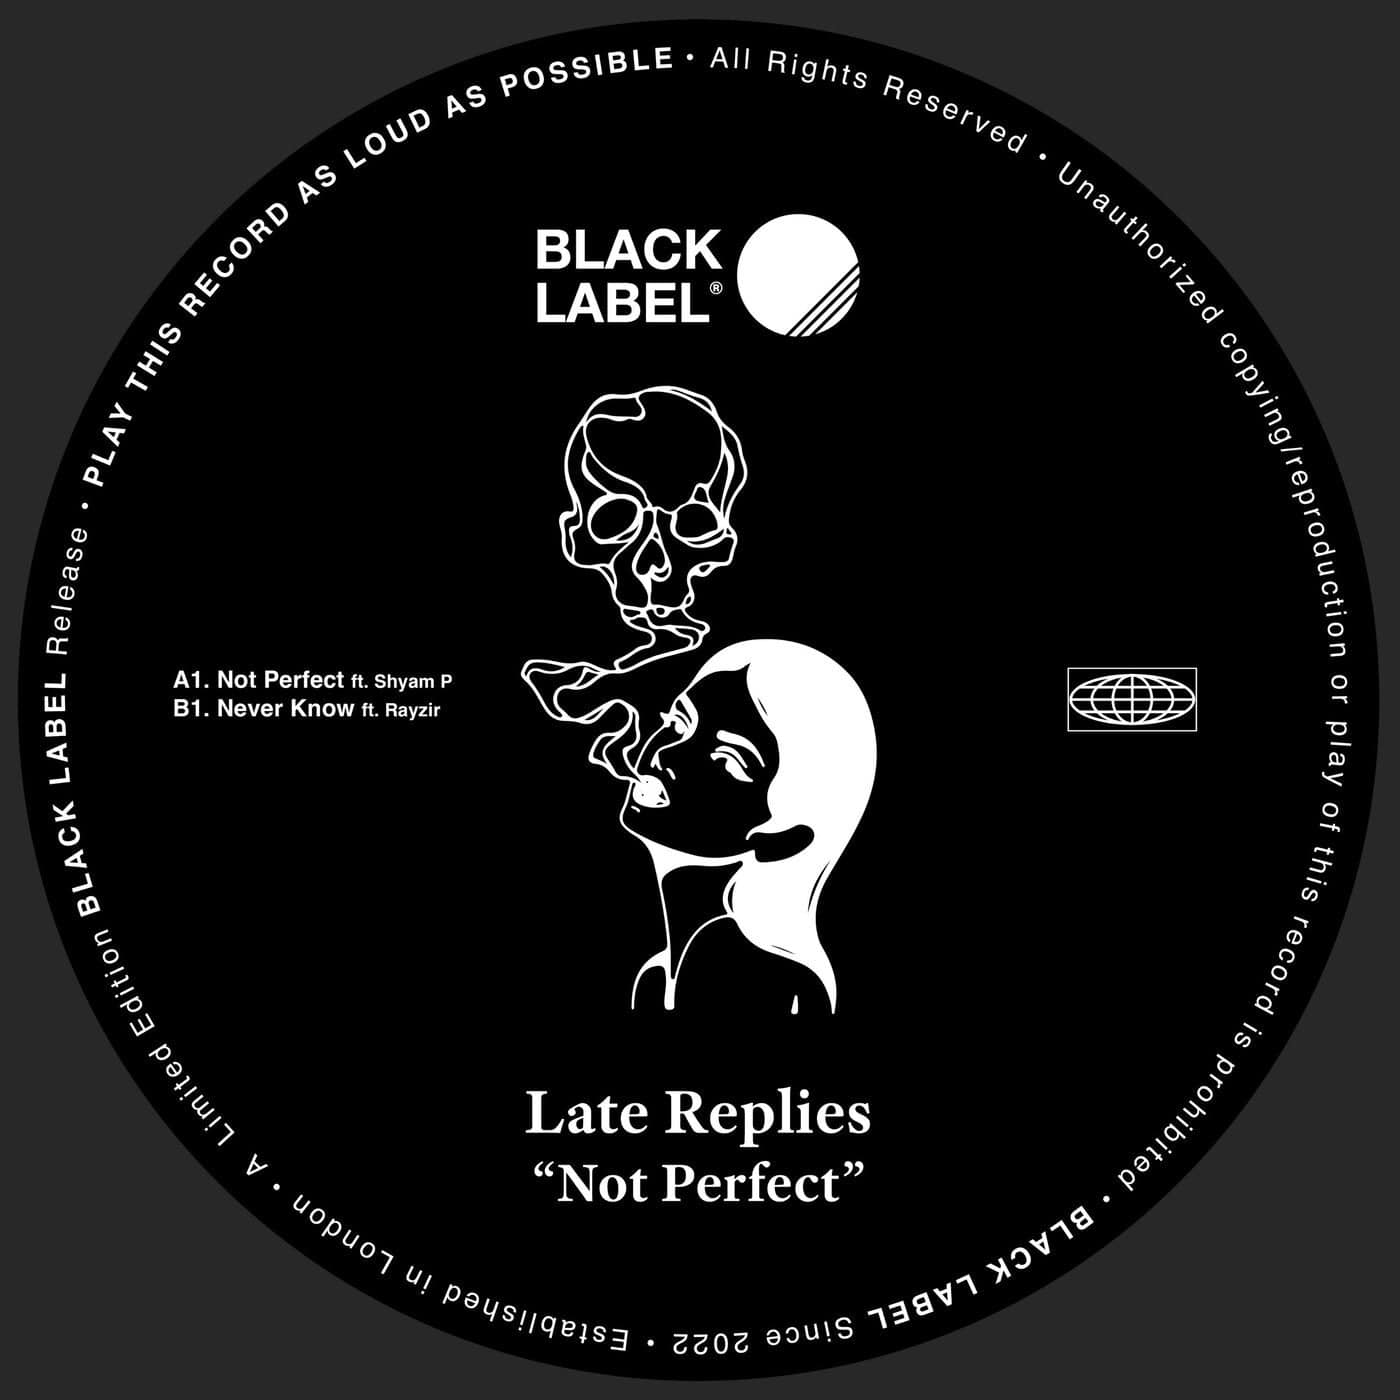 image cover: Shyam P, Late Replies, RAYZIR - Not Perfect / BLR003